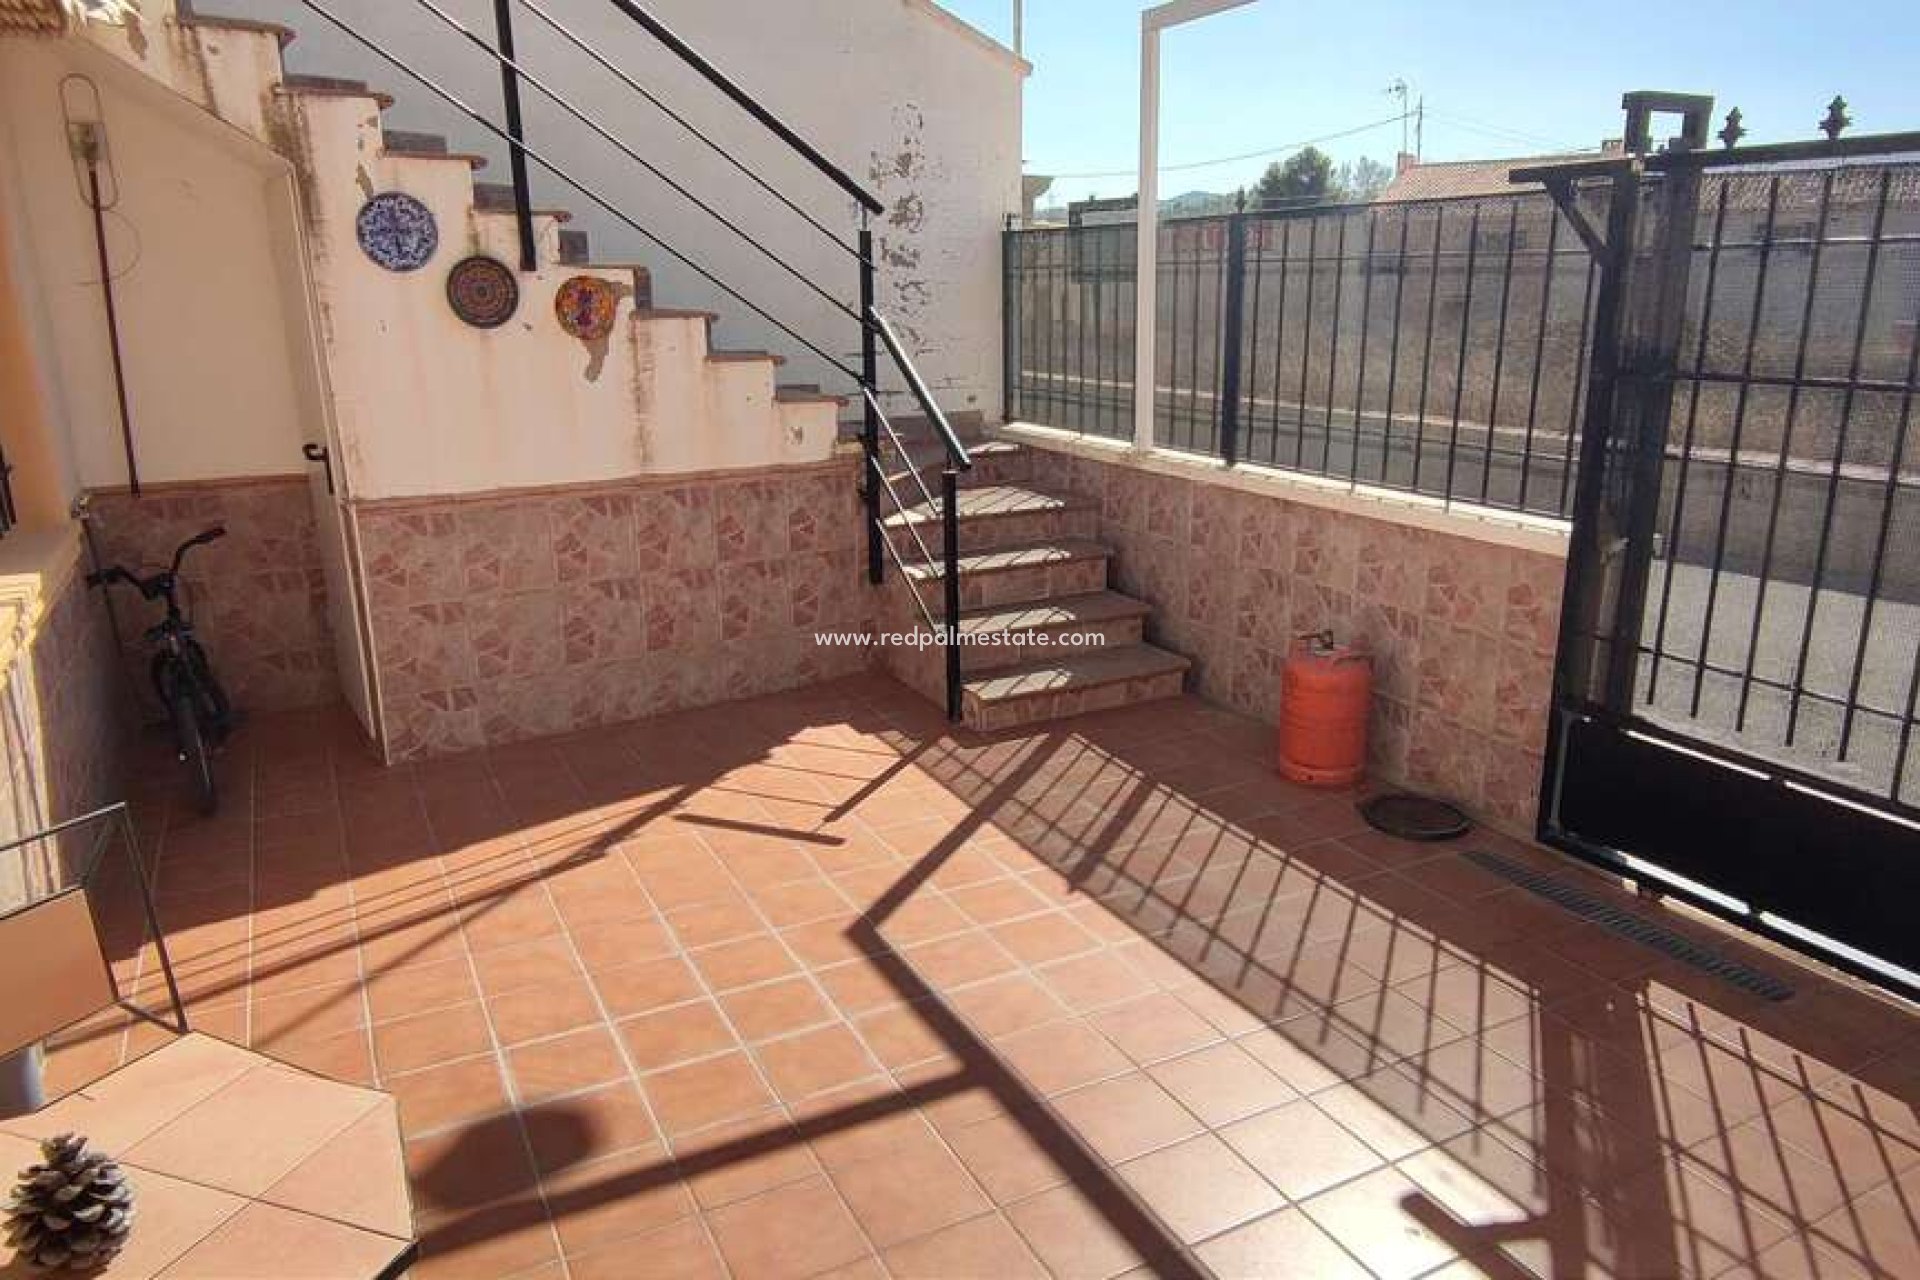 Resale - Country House -
Ubeda